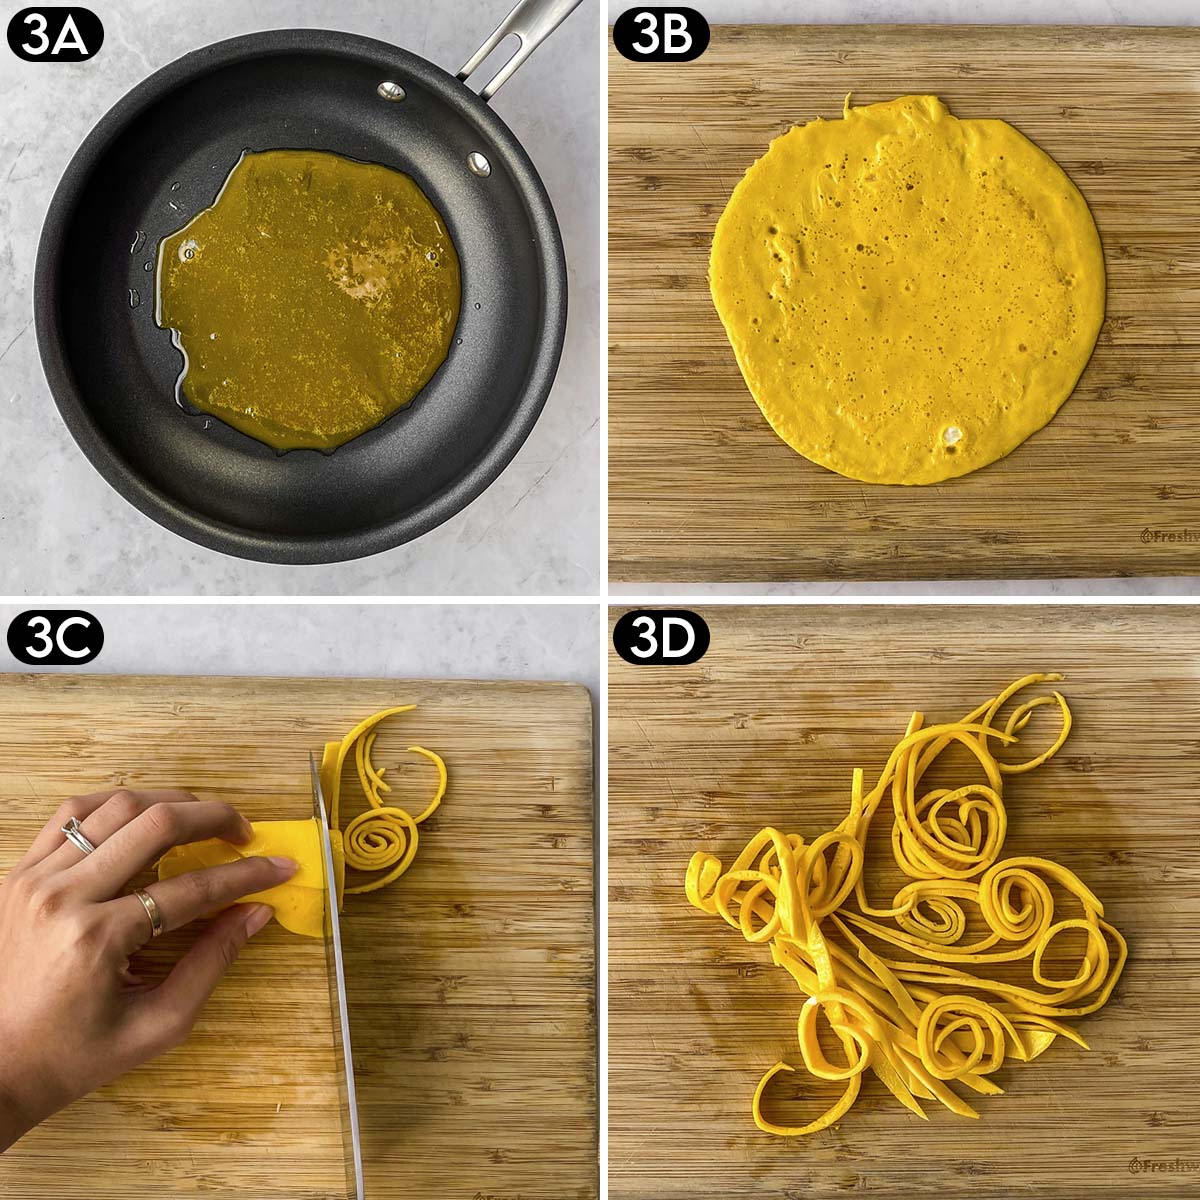 Cooking egg yolks and slicing thinly.